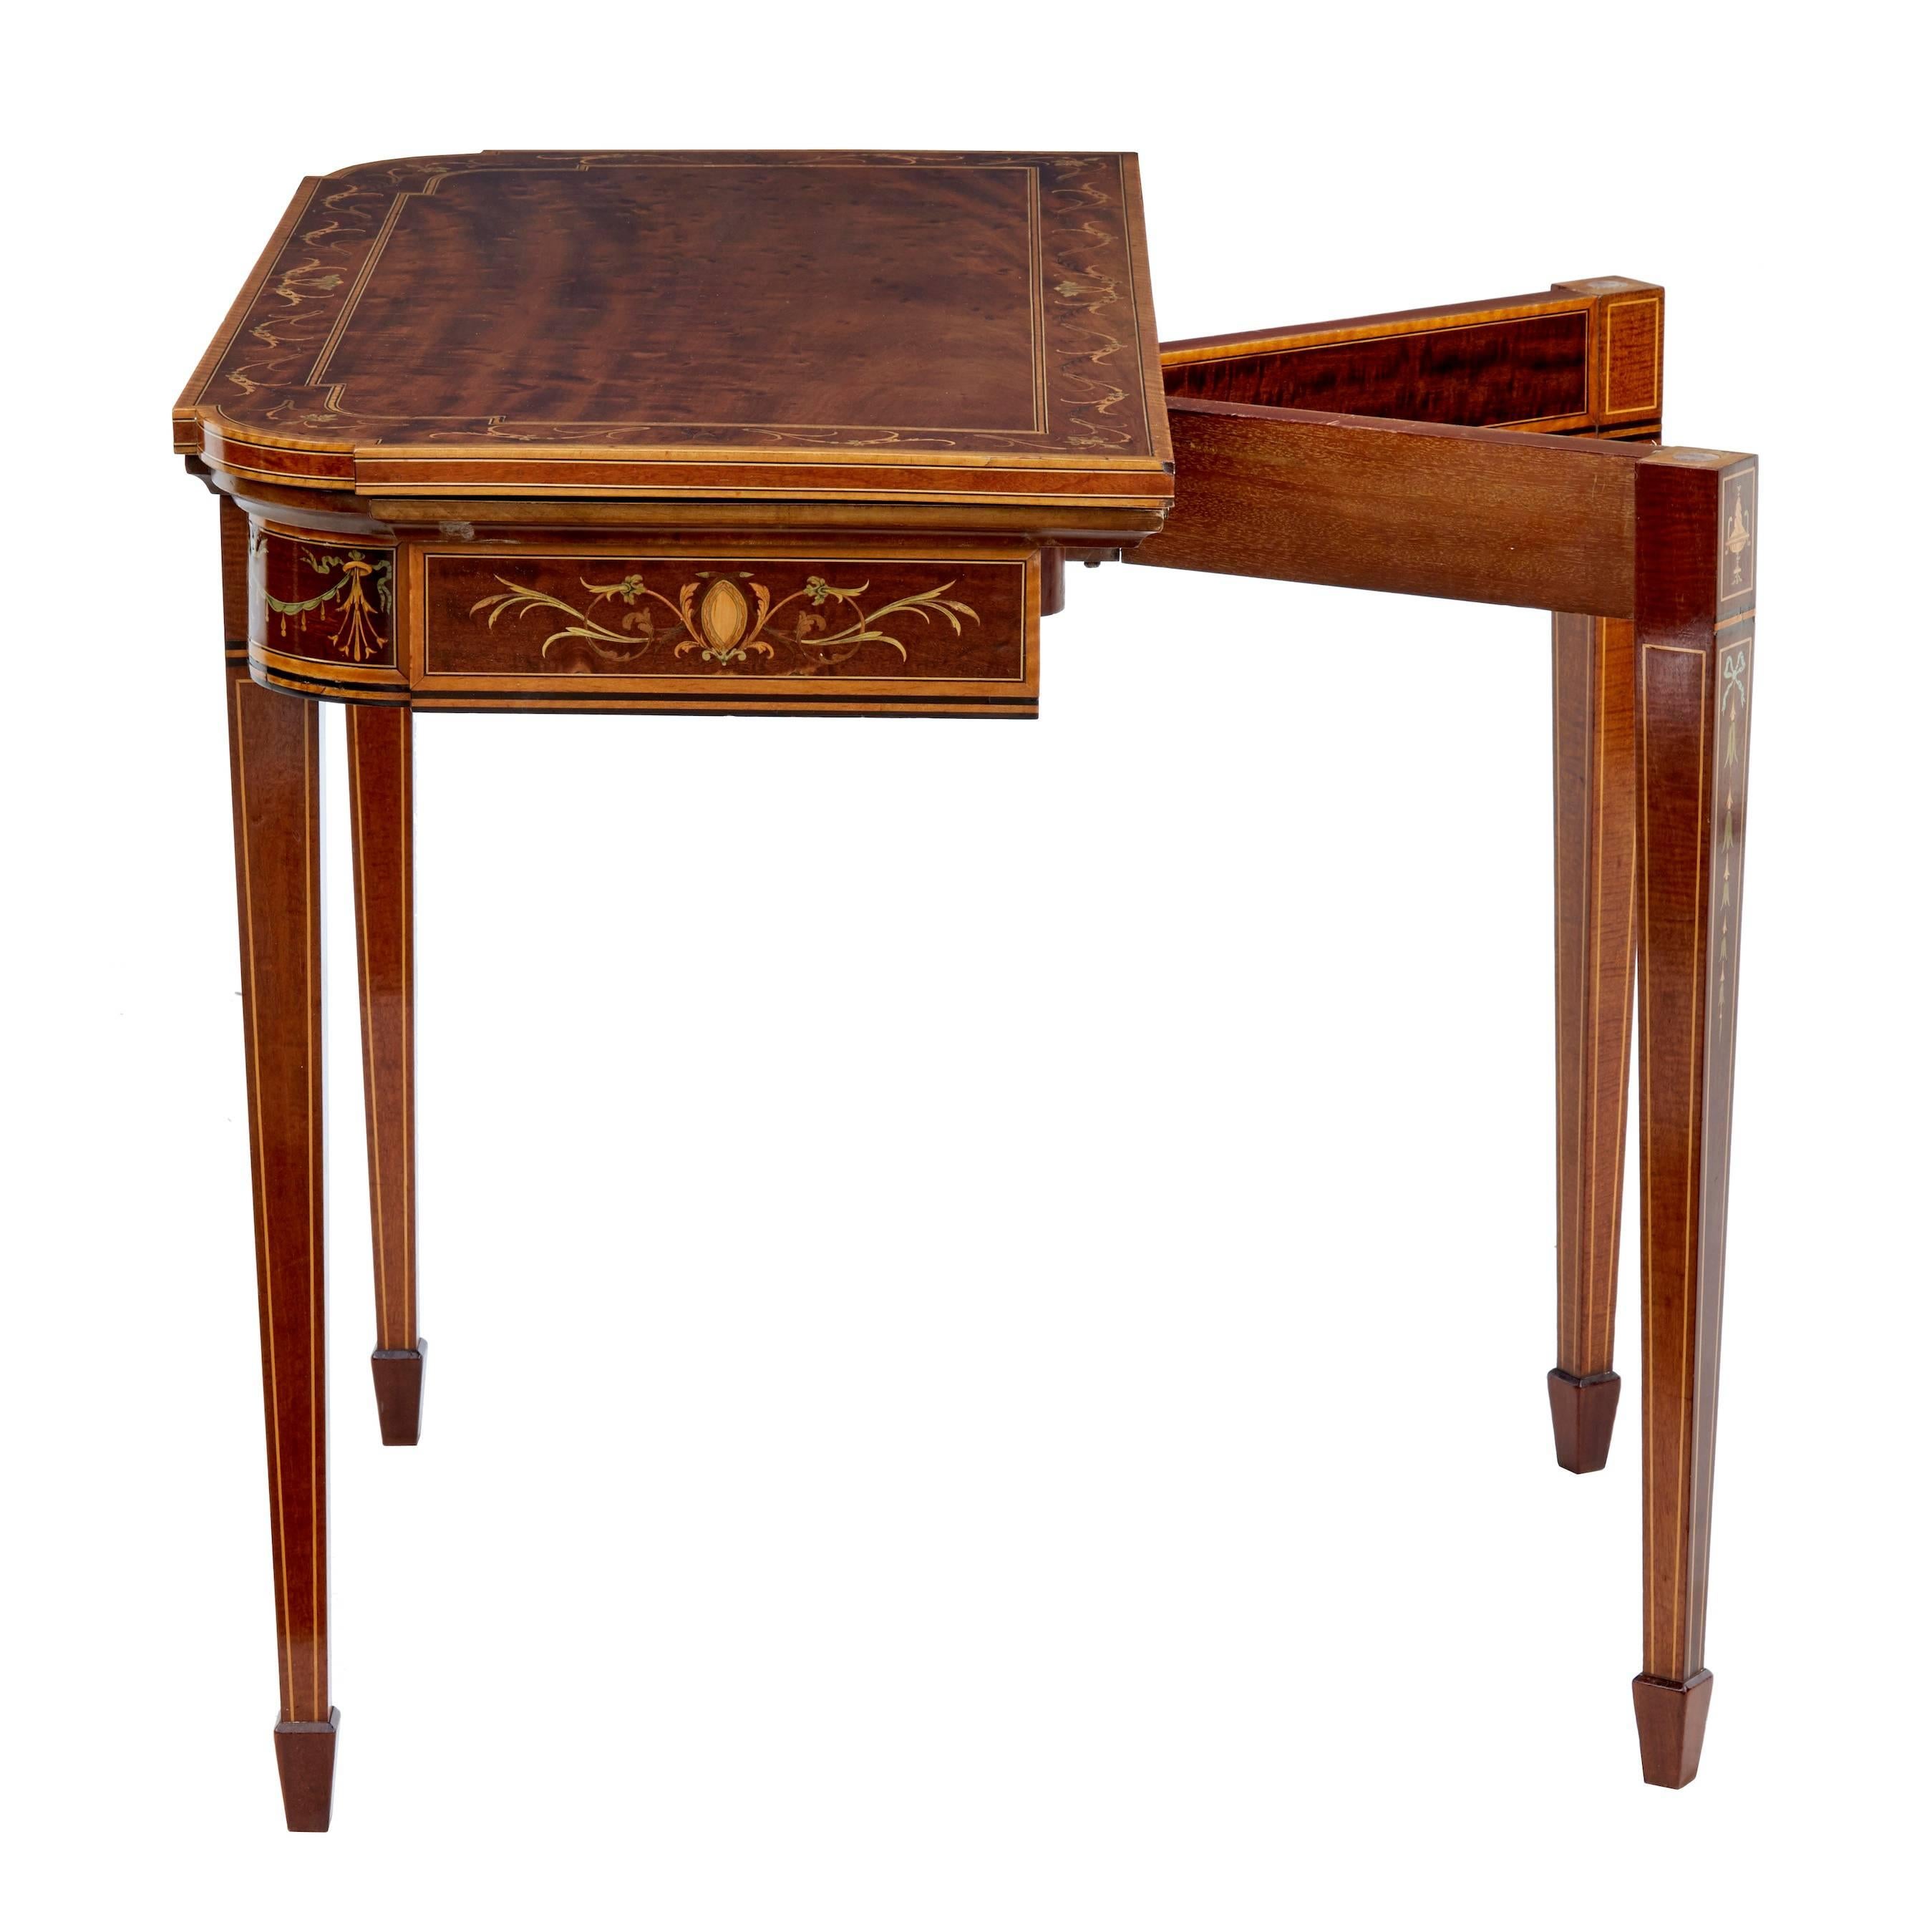 Fine quality card table made by renowned English makers Edwards and Roberts.
Beautiful plum pudding mahogany top inlaid with satinwood, boxwood, ebony and walnut.
Back legs swing out to allow the top to fold over to reveal a red playing